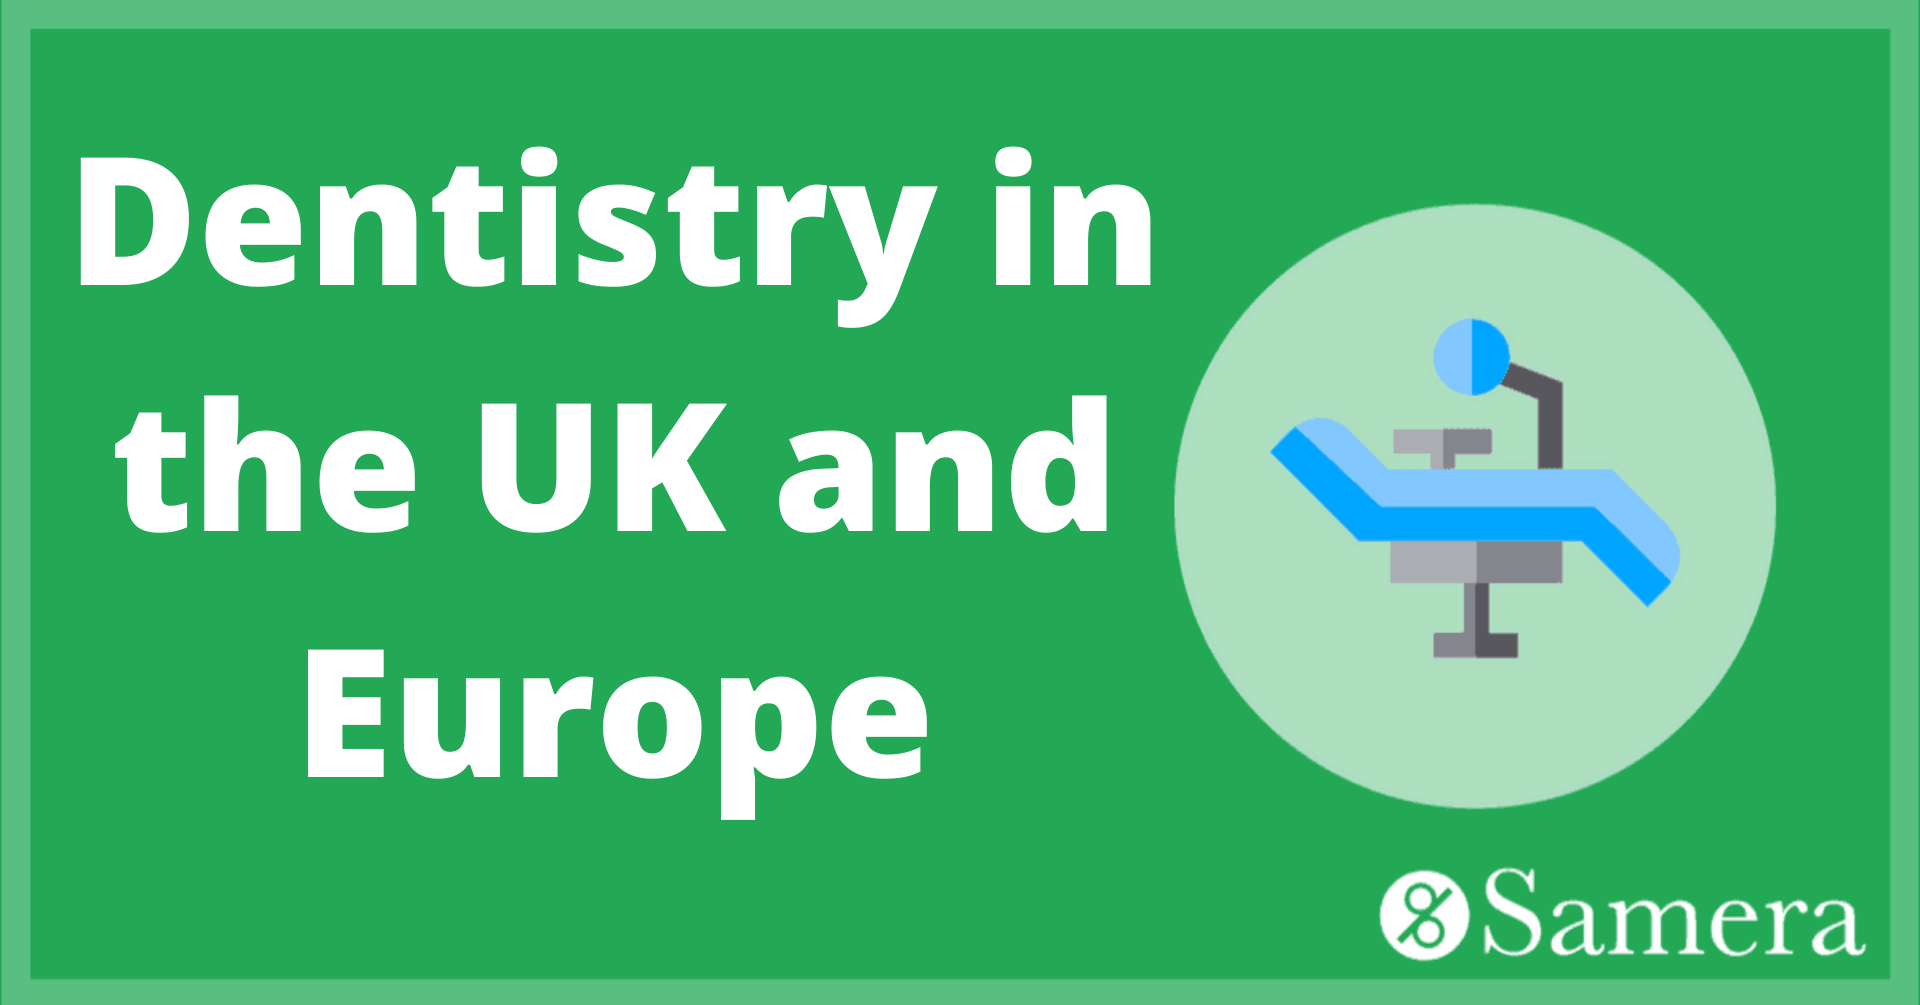 Dentistry in the UK and Europe